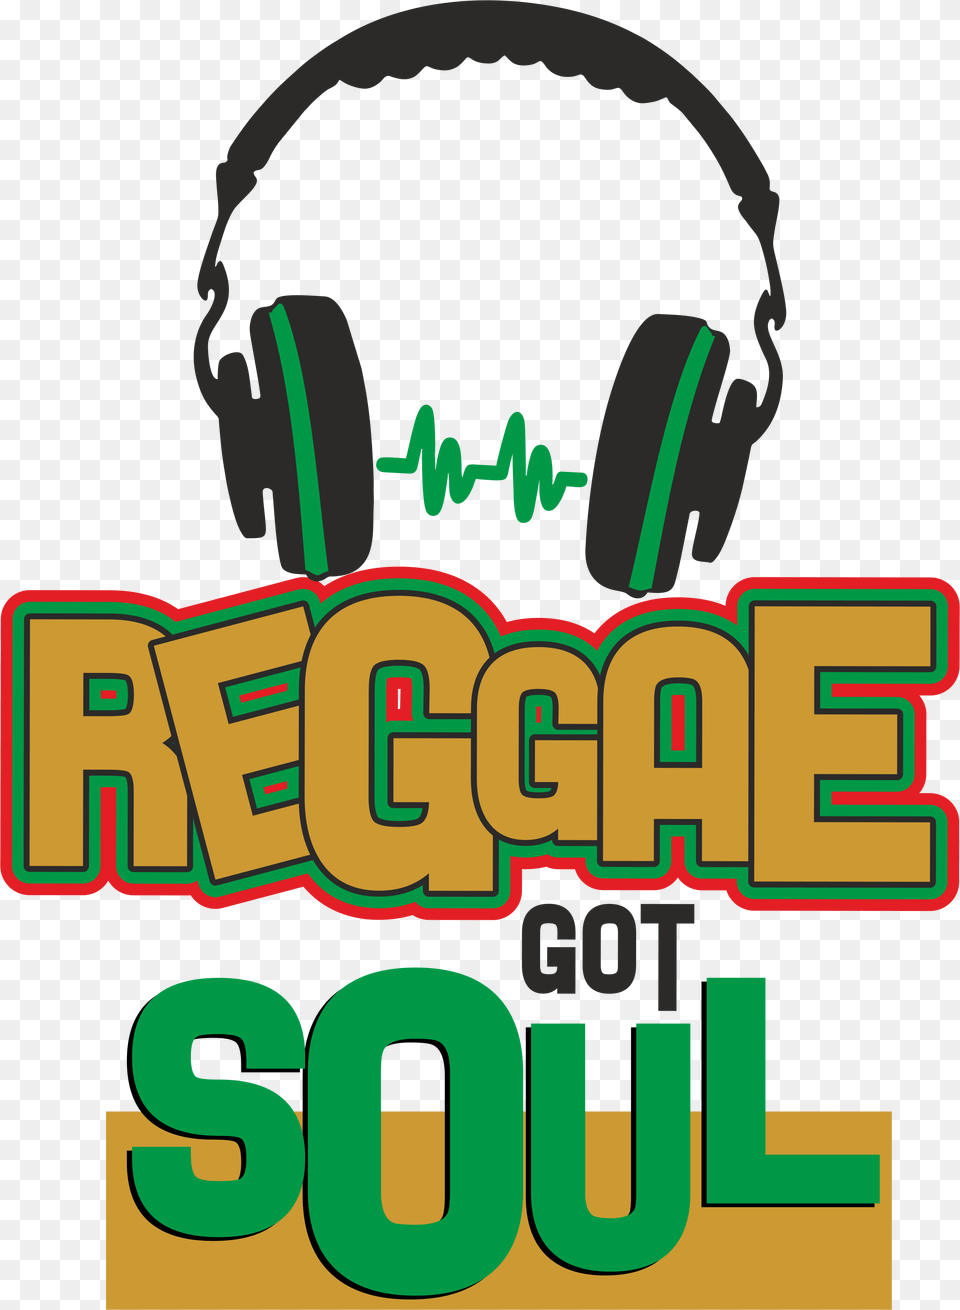 Listen To The Best Reggae Songs Of 2017 From The Best Crocodil Graphics Iphone Decals Iphone Stickers Vinyl, Electronics, Device, Grass, Lawn Free Png